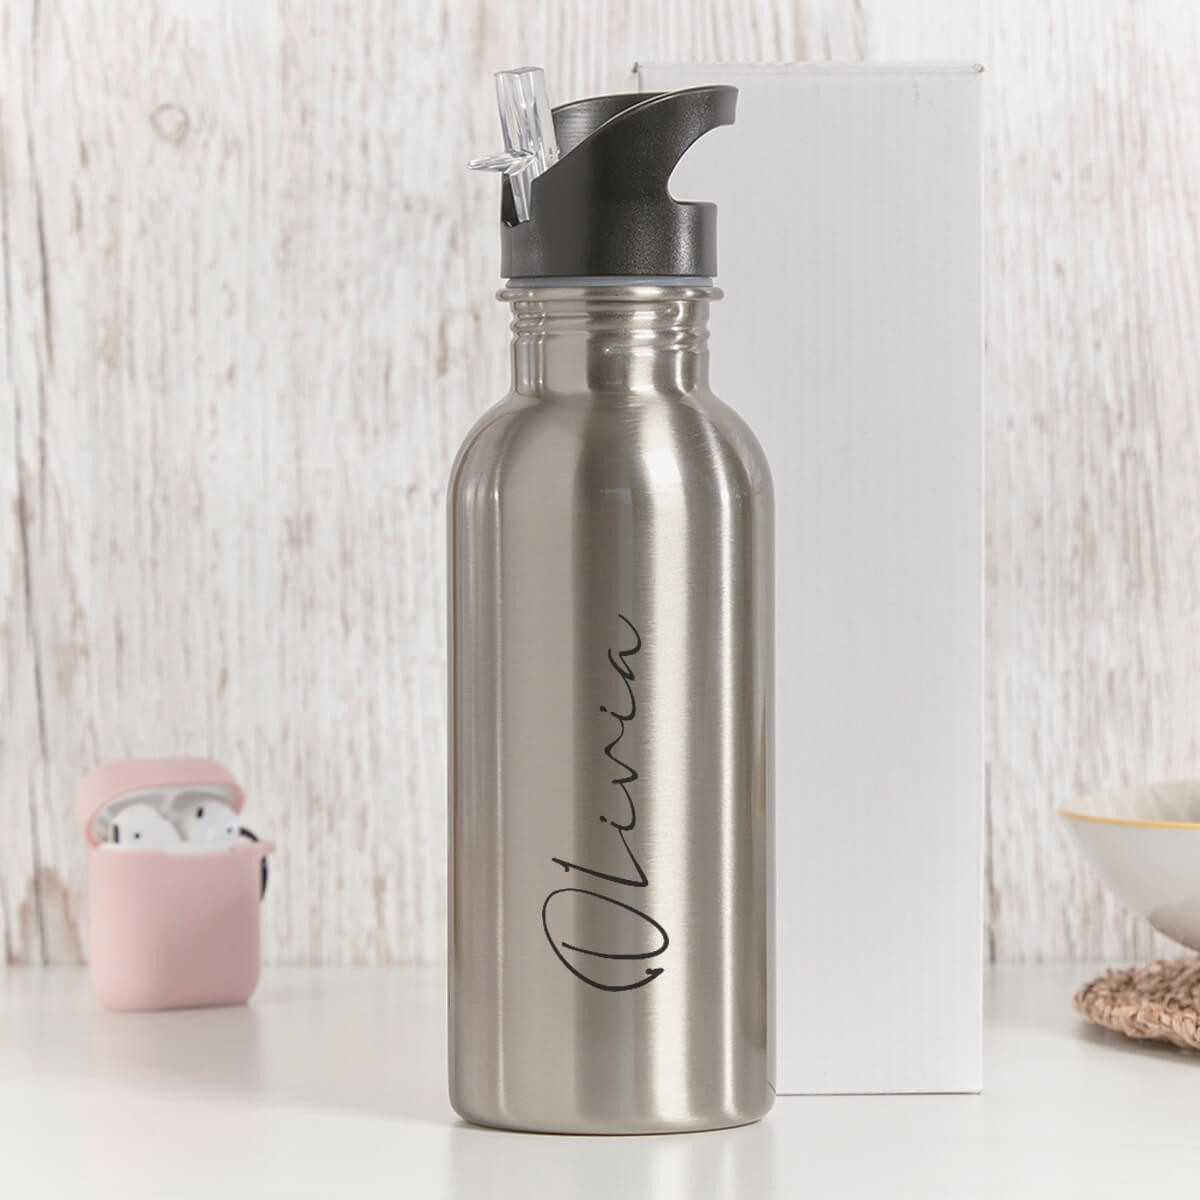 https://www.boutiquegifts.co.uk/media/catalog/product/cache/1/image/9df78eab33525d08d6e5fb8d27136e95/o/r/ornate_name_water_bottle_with_straw_thumbnails_1.jpg